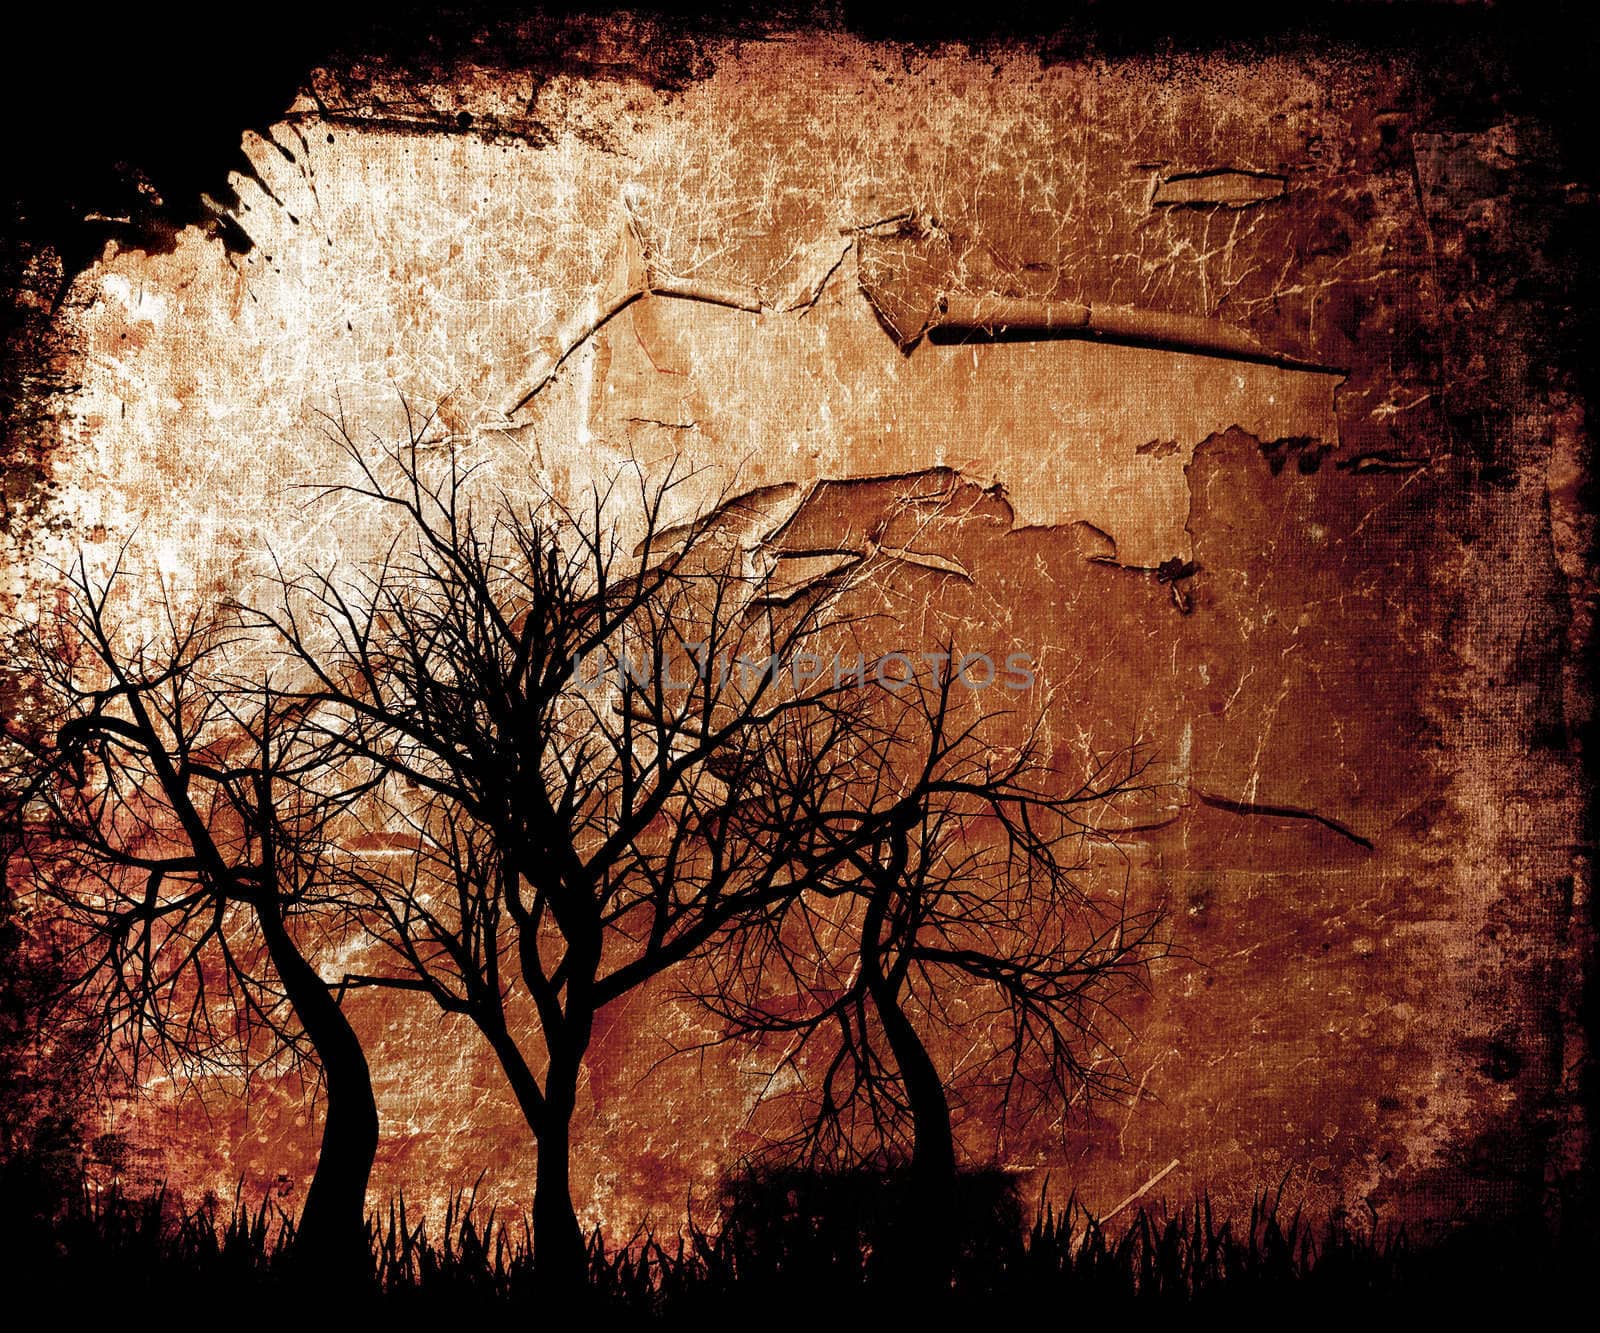 Silhouettes of trees on grunge background